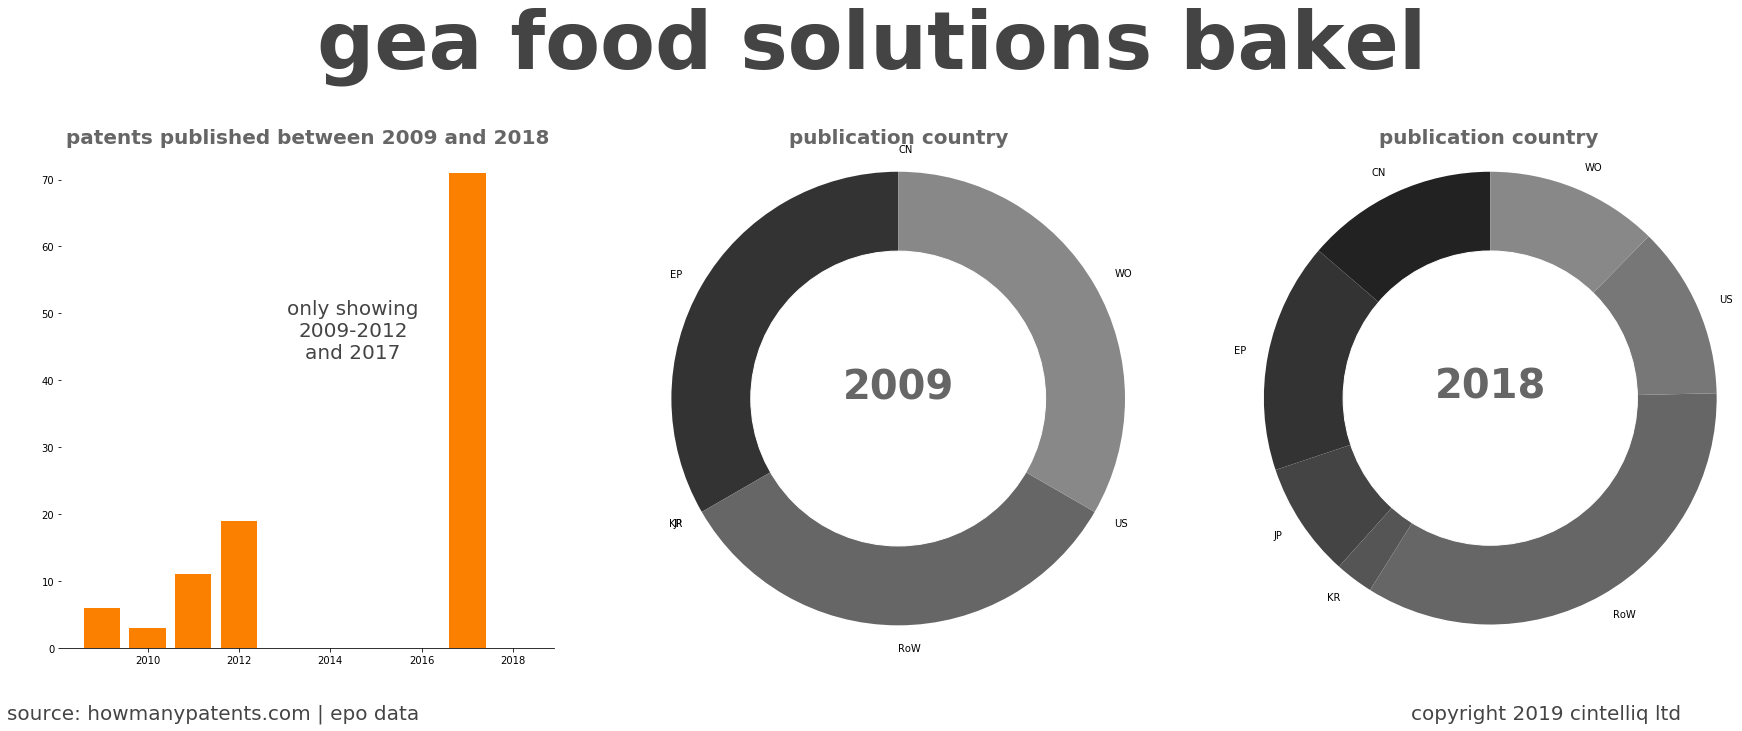 summary of patents for Gea Food Solutions Bakel